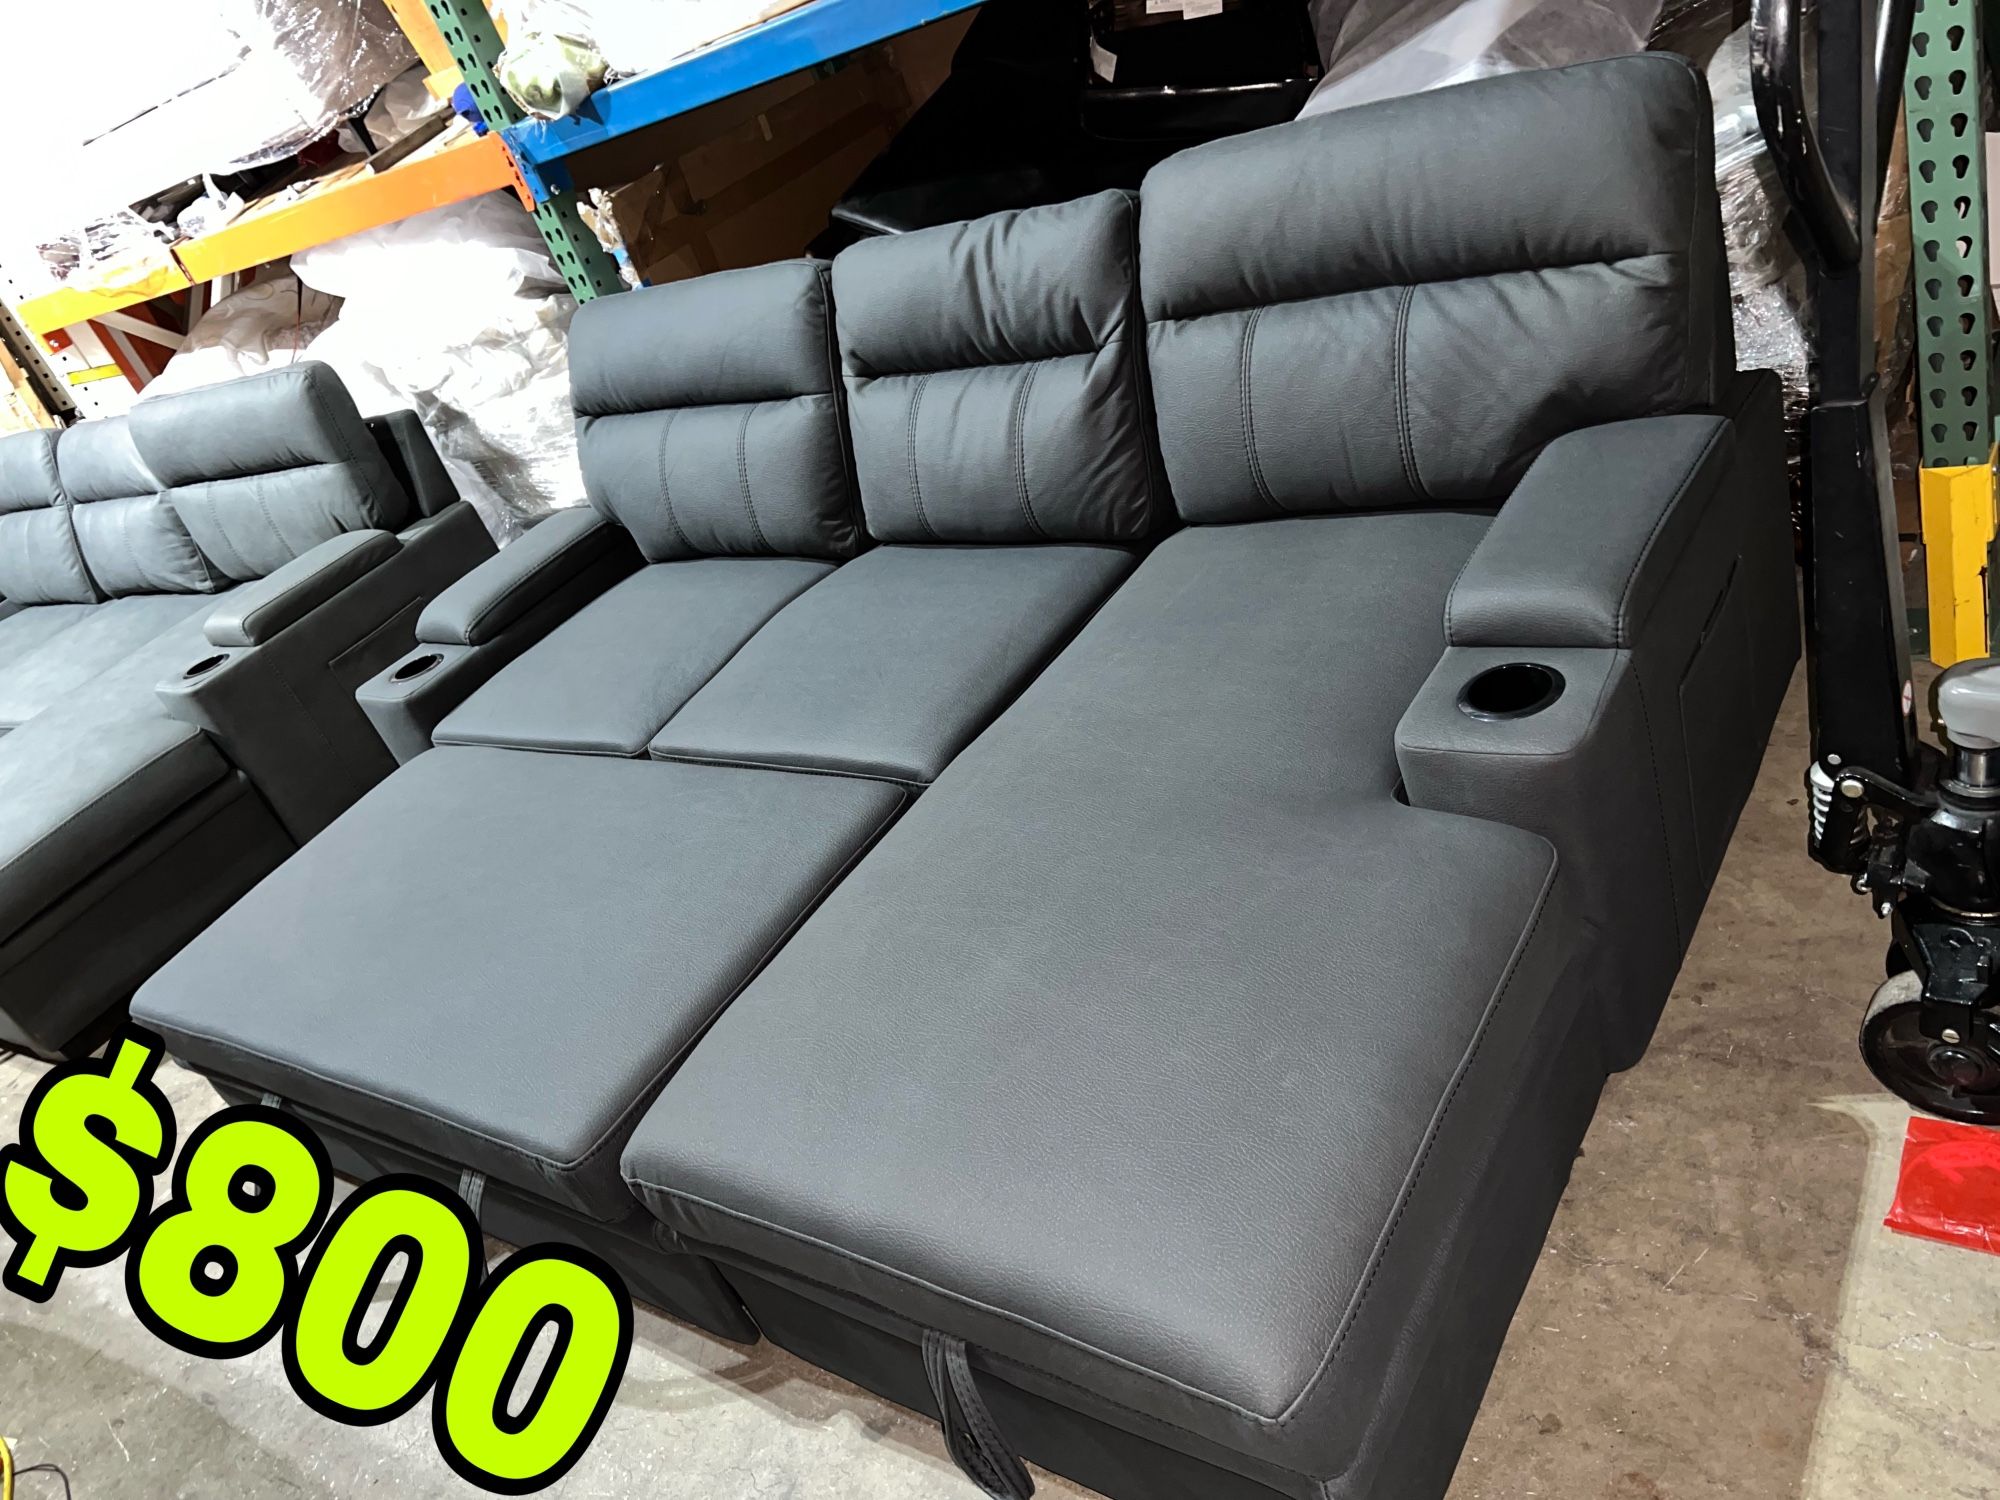 Beautiful New Sectional Sofa Bed W/ Storage Chaise & Storage Arms in Black Microfiber Only $800!!!